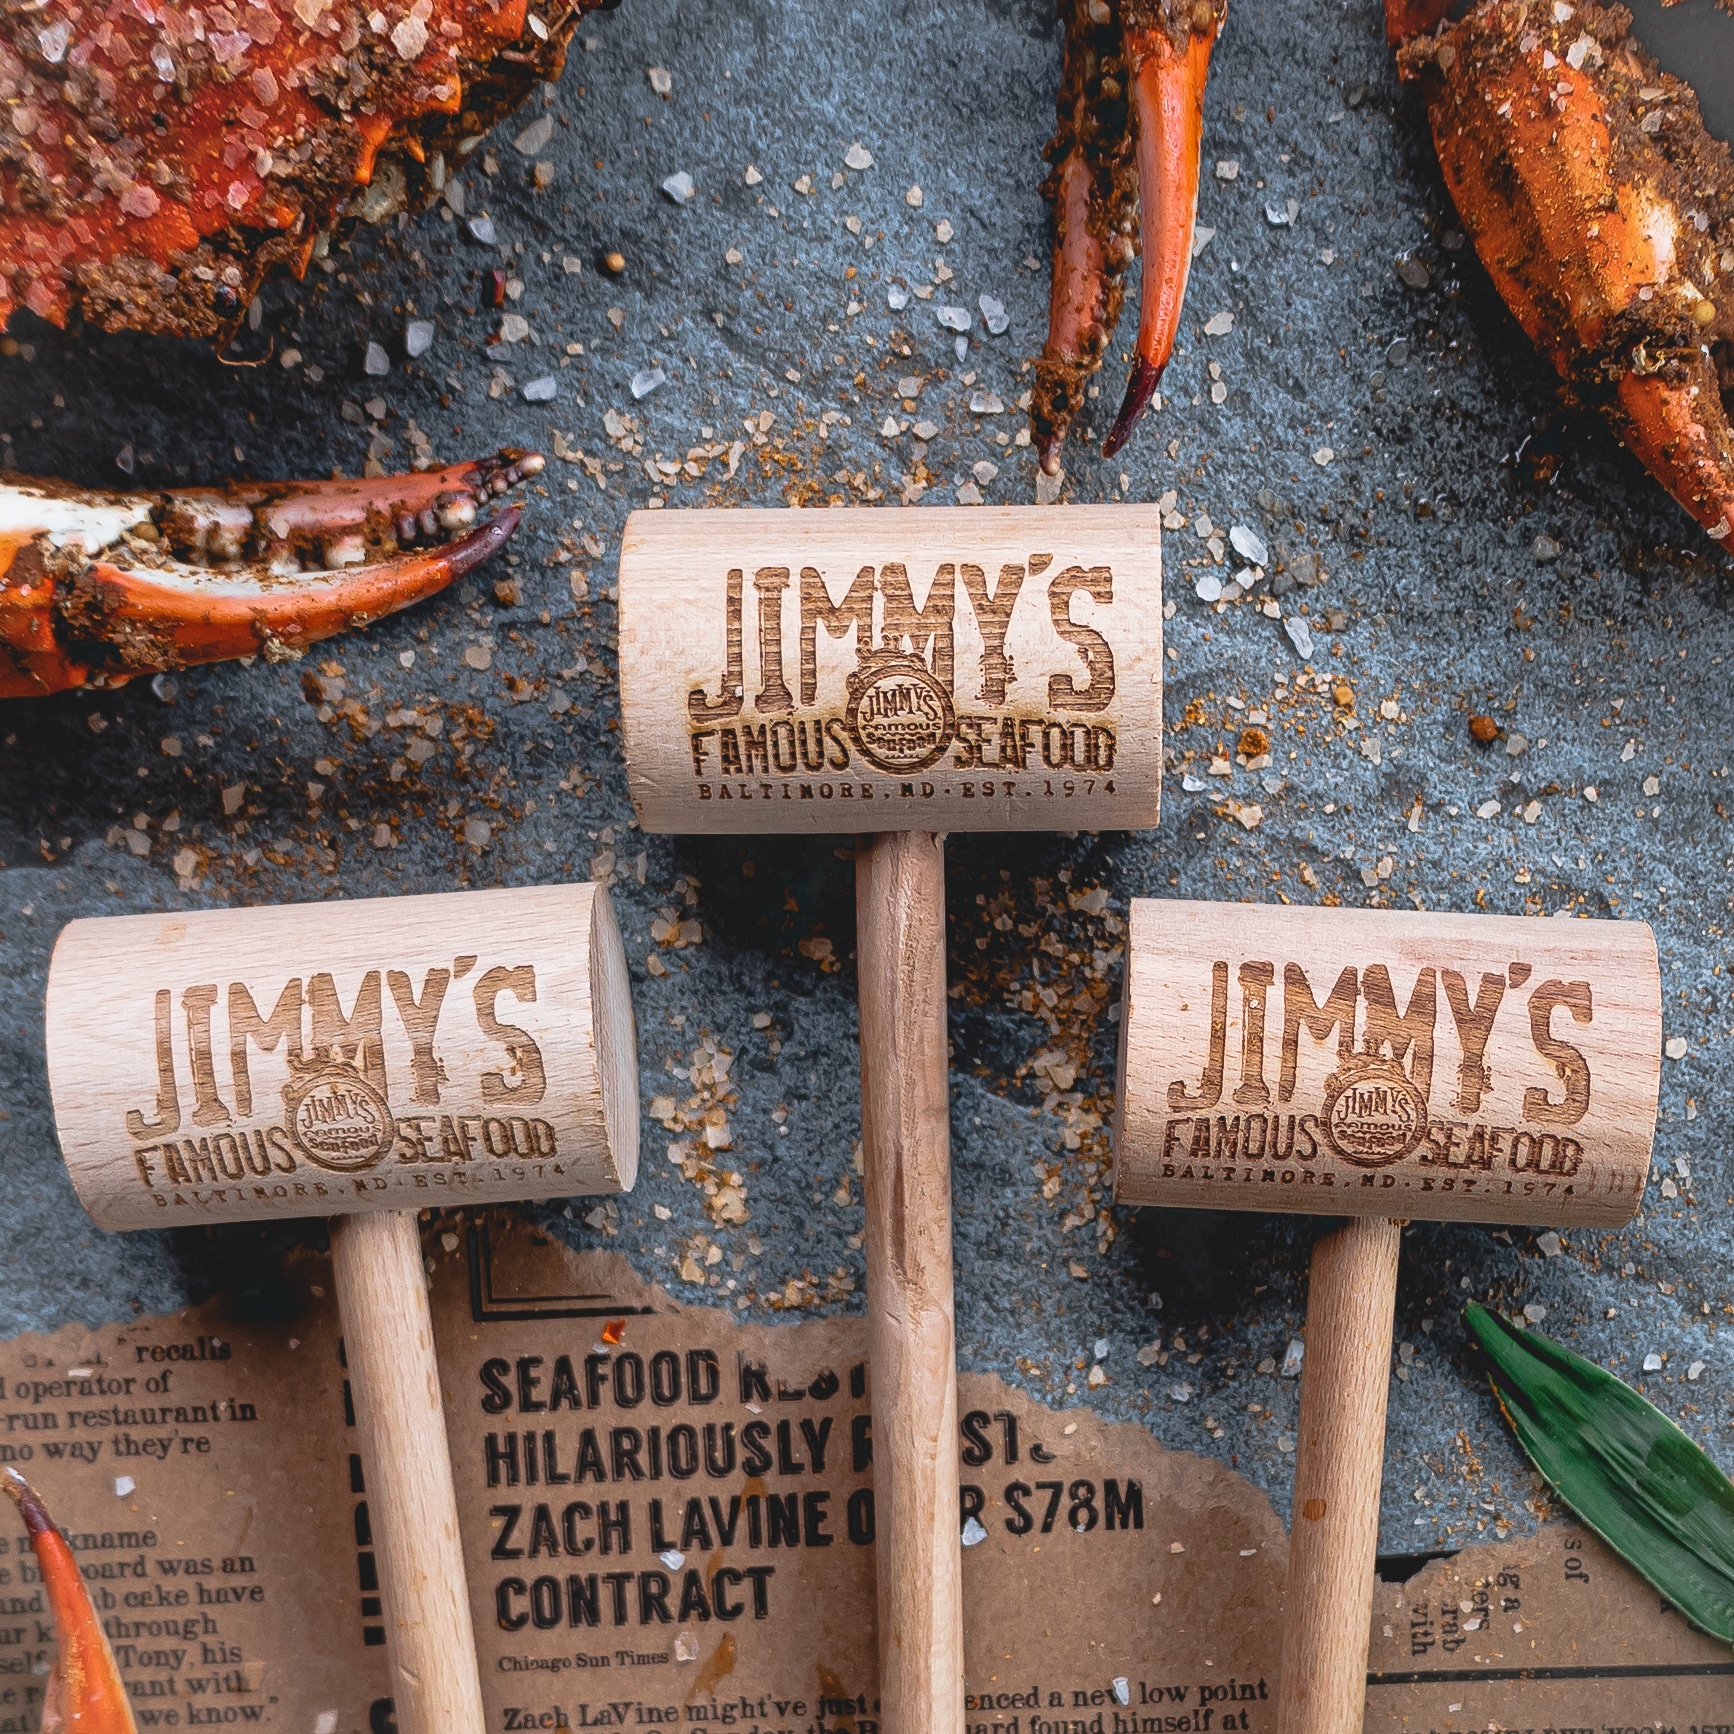 Crab Mallet - Jimmys Famous Seafood